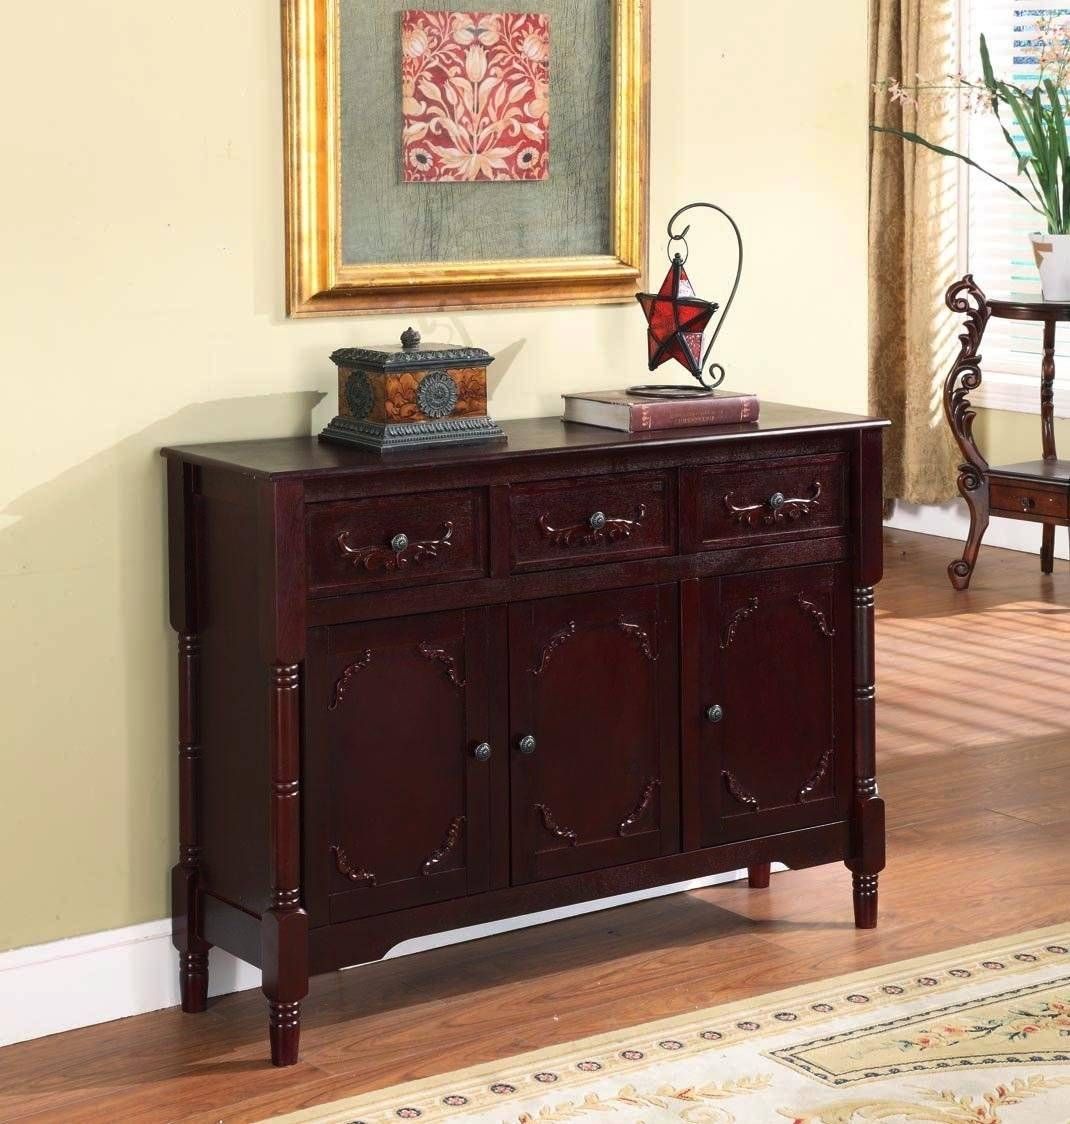 Sideboard: Awesome Overstock Sideboard For Sale Dining Room Within Overstock Sideboards (View 4 of 15)